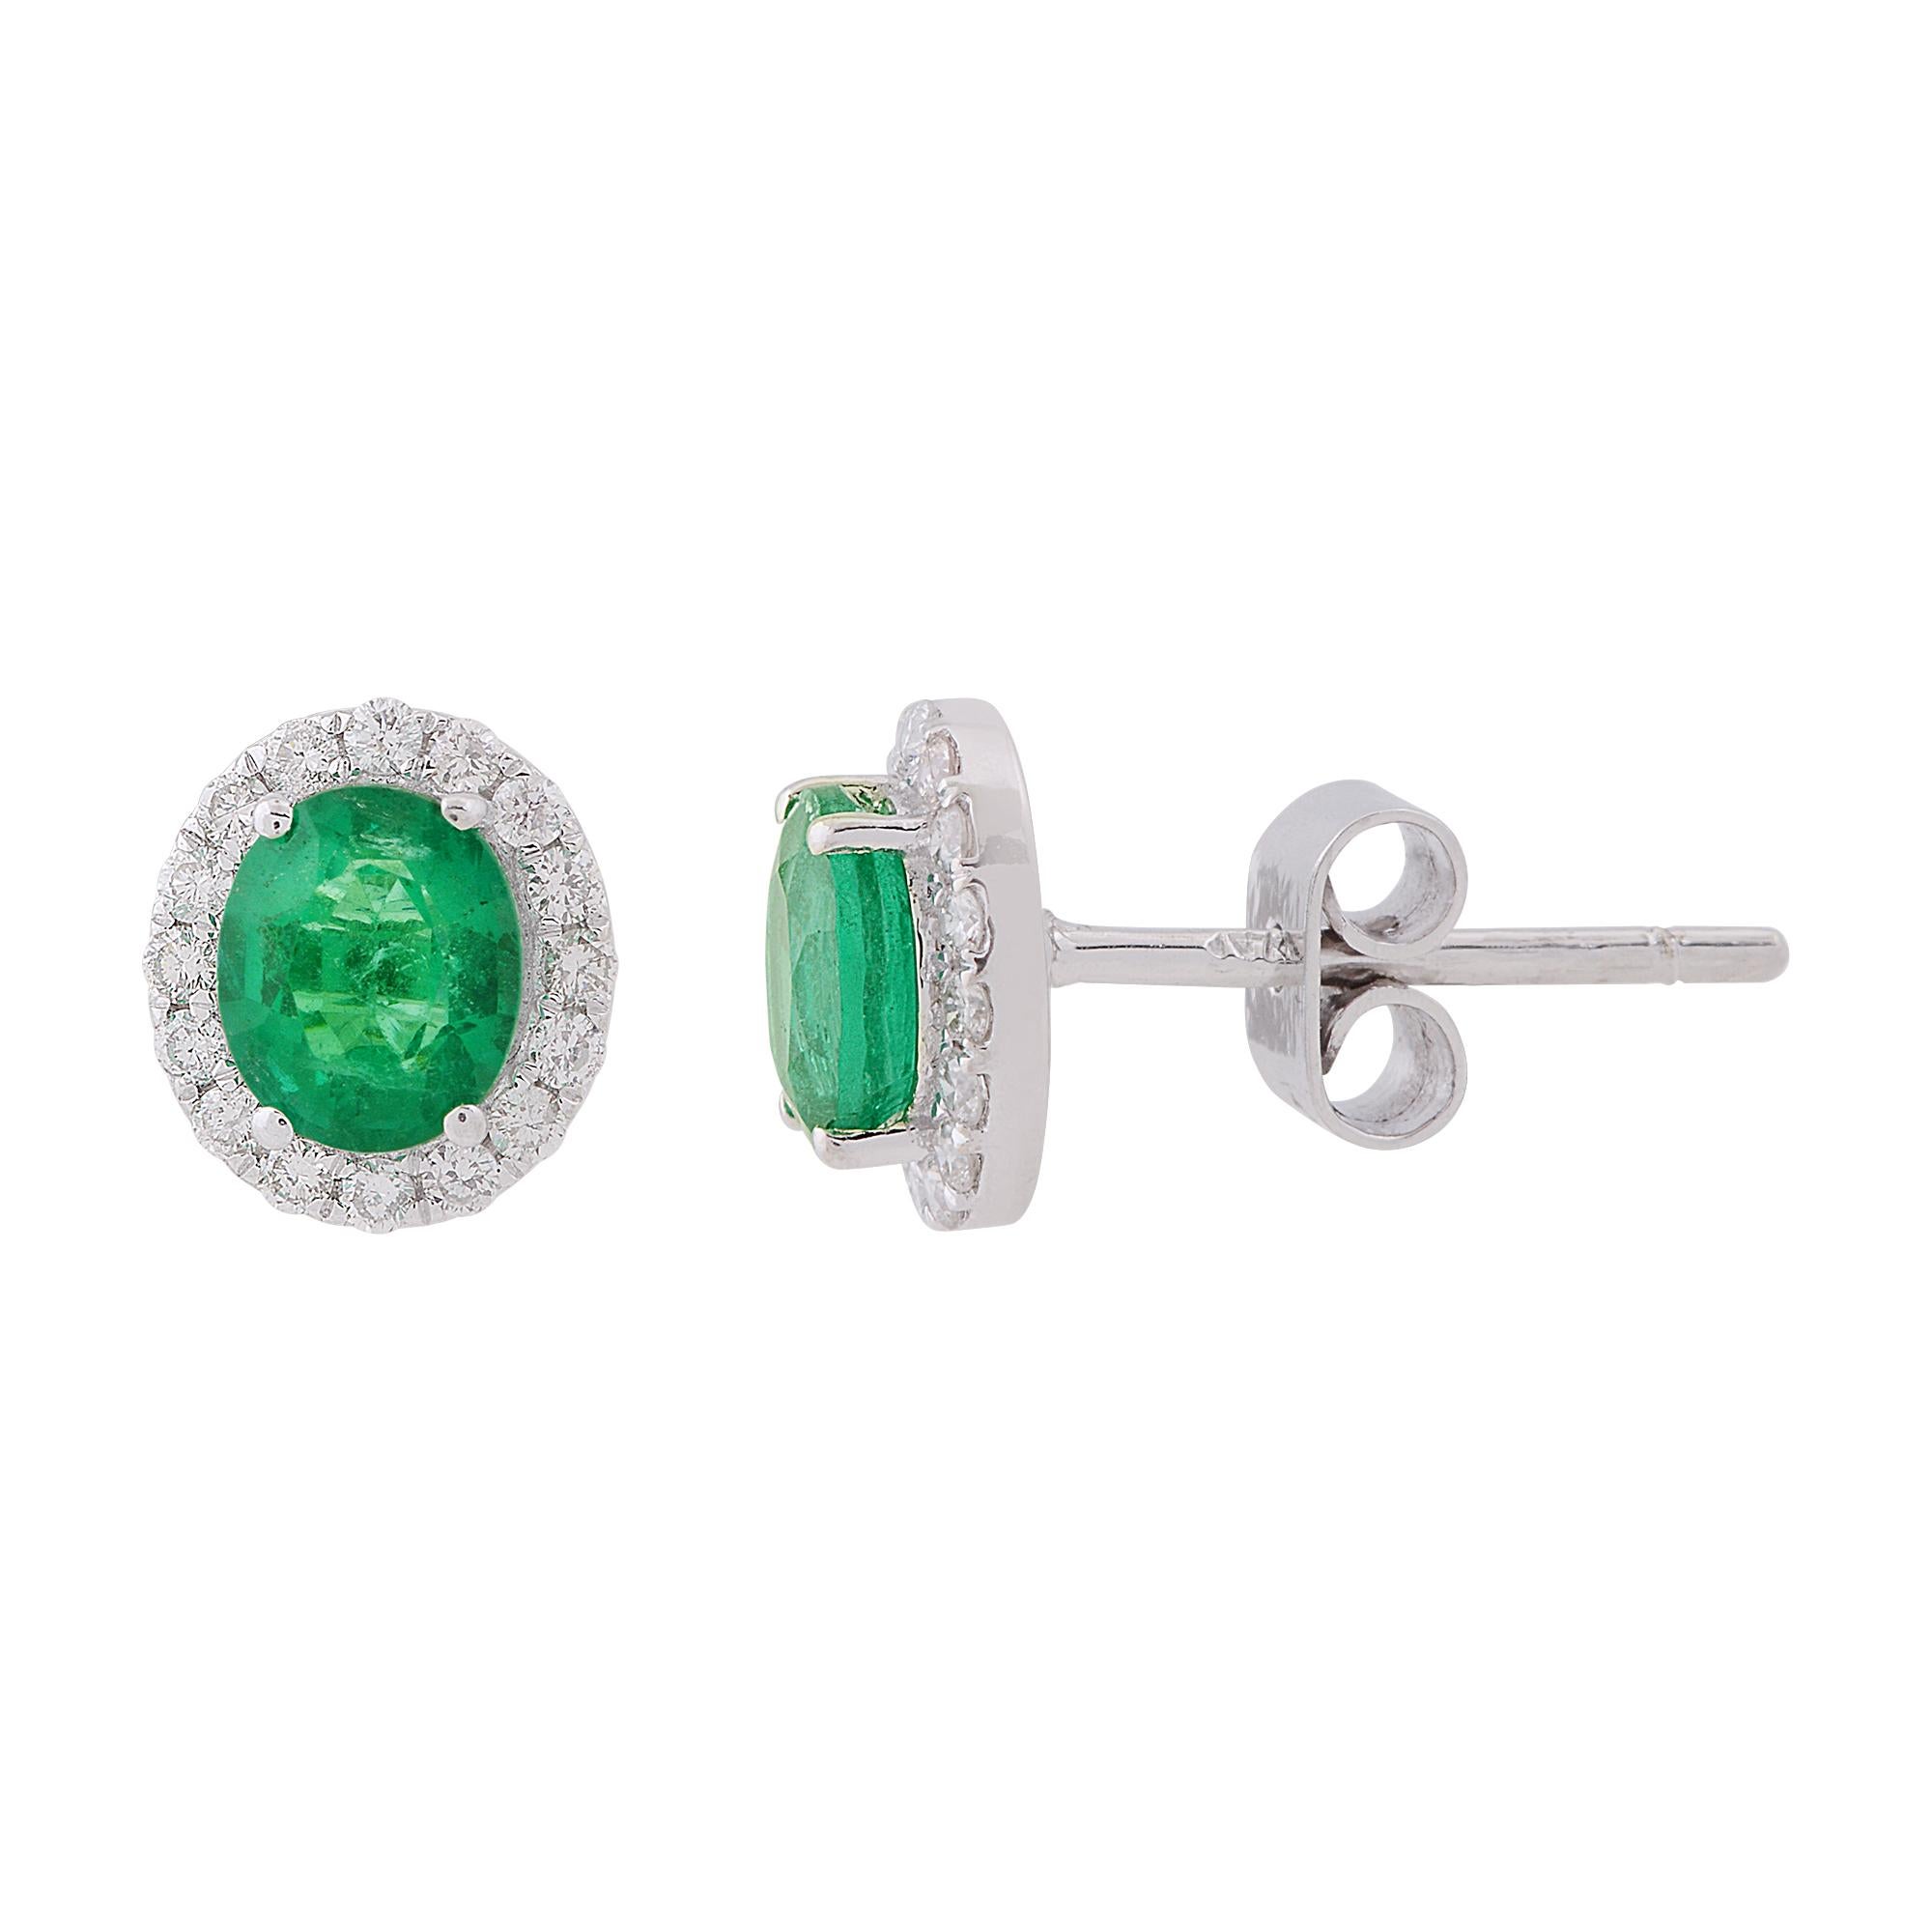 Item Code :- SFE-1025
Gross Wt. :- 2.03 gm
14k White Gold Wt. :- 1.80 gm
Natural Diamond Wt. :- 0.23 Ct. ( AVERAGE DIAMOND CLARITY SI1-SI2 & COLOR H-I )
Emerald Wt. :- 0.91 Ct.
Earrings Size :- 9 x 6 mm approx.

✦ Sizing
.....................
We can